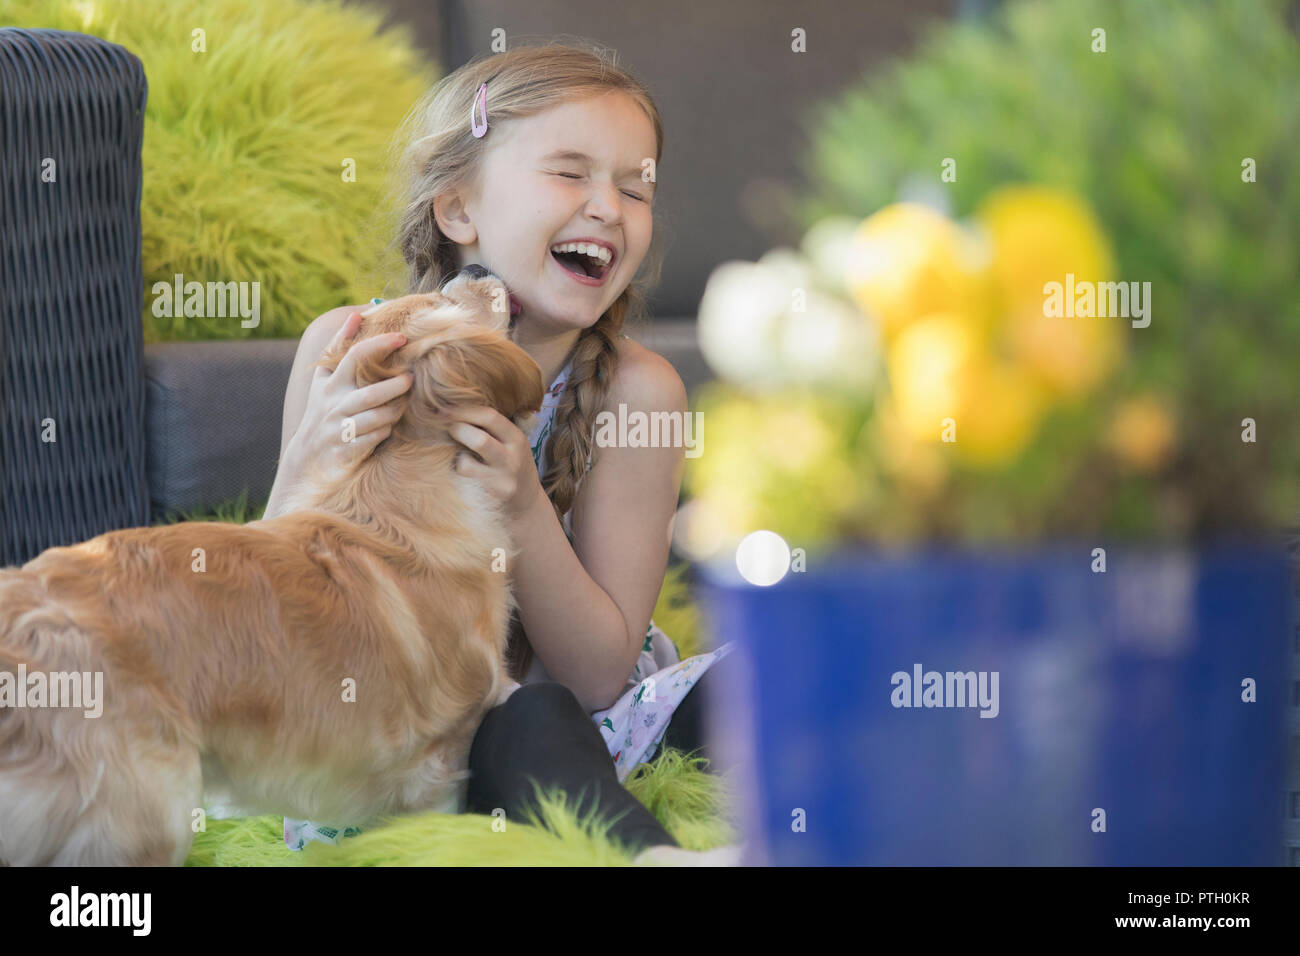 Dog kissing laughing girl on patio Stock Photo